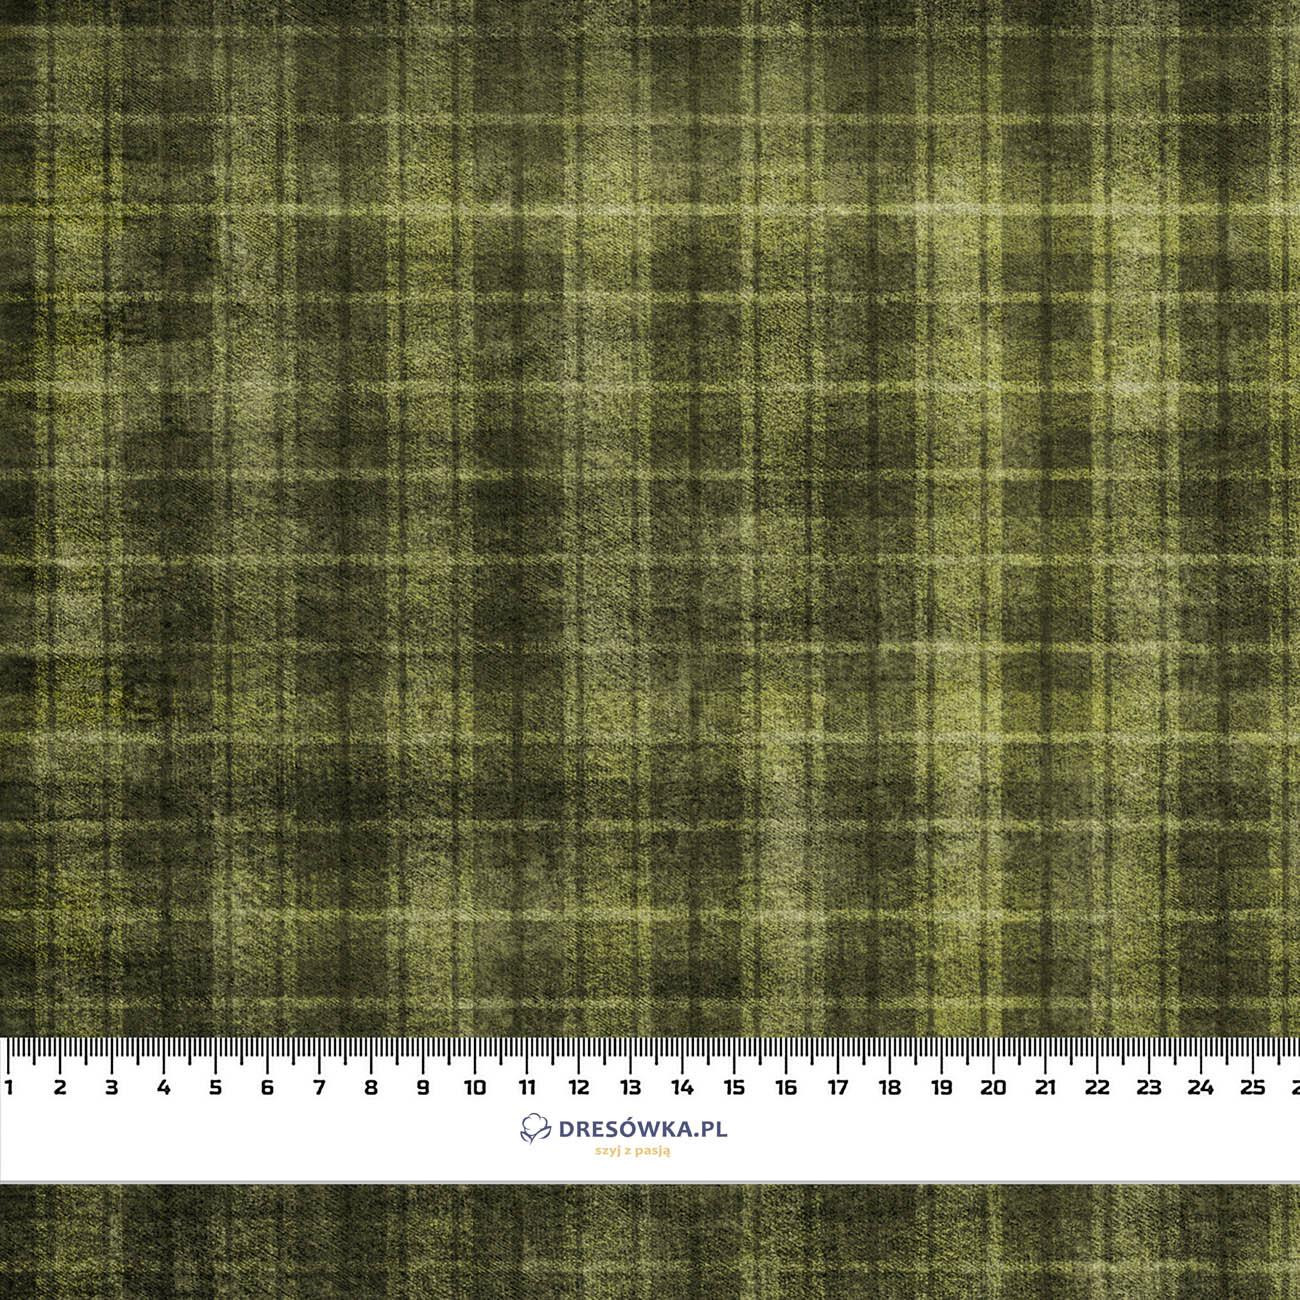 AUTUMN CHECK  / green (AUTUMN COLORS) - brushed knit fabric with teddy / alpine fleece